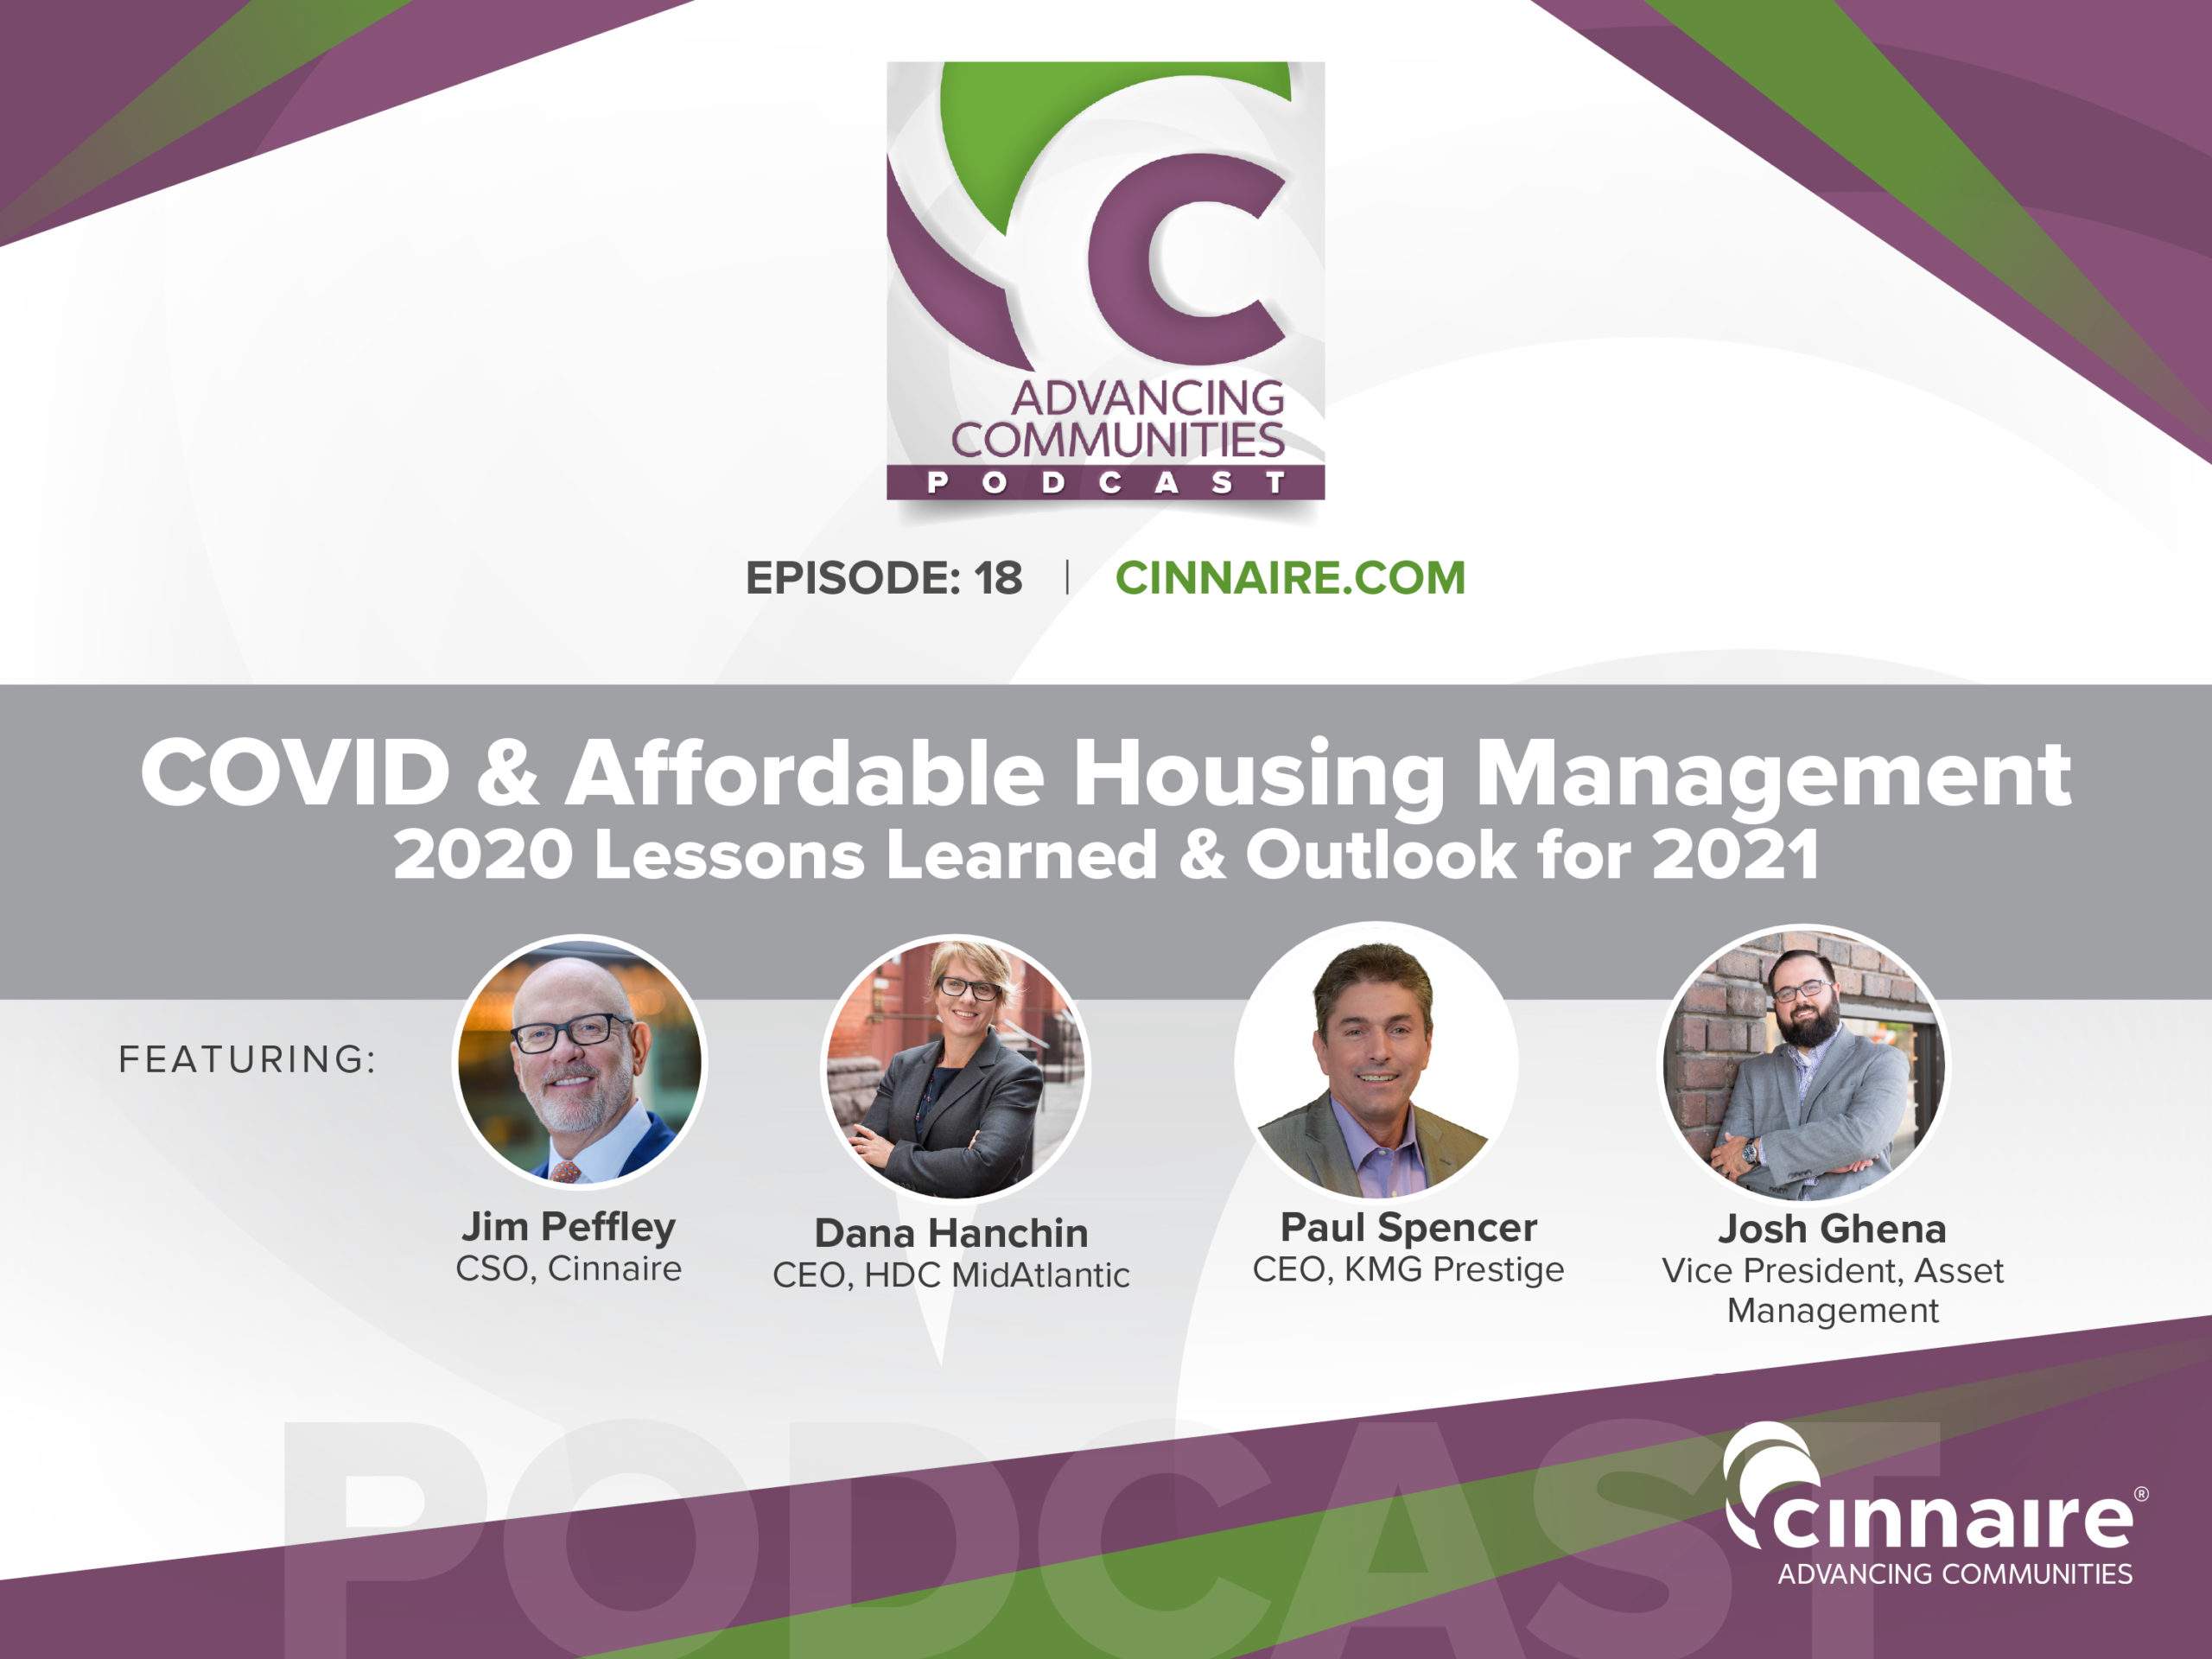 Advancing Communities Podcast: COVID & Affordable Housing Management – 2020 Lessons Learned & Outlook for 2021